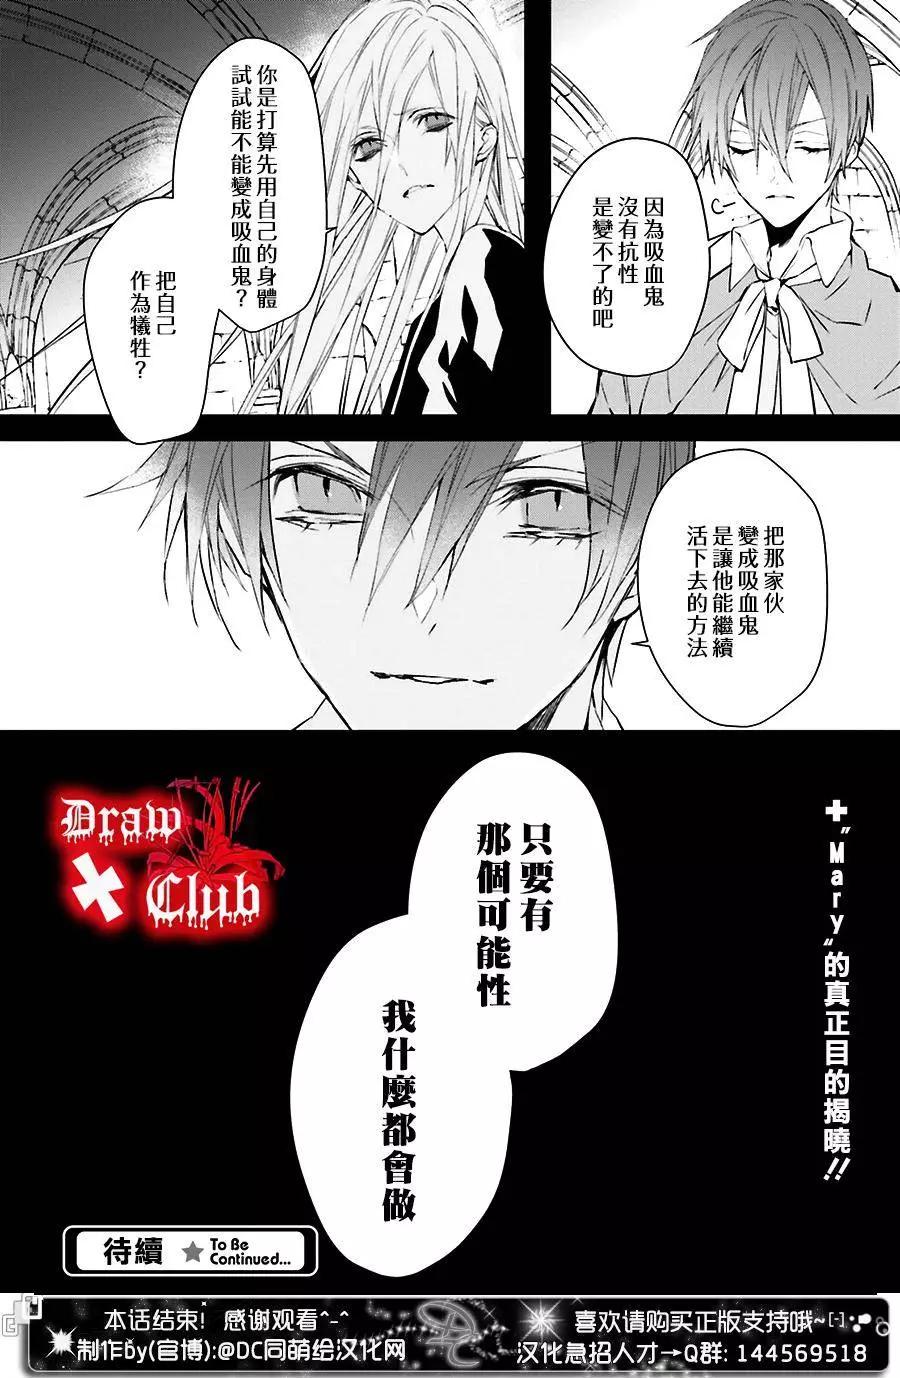 Bloody Mary - 第33回 - 5